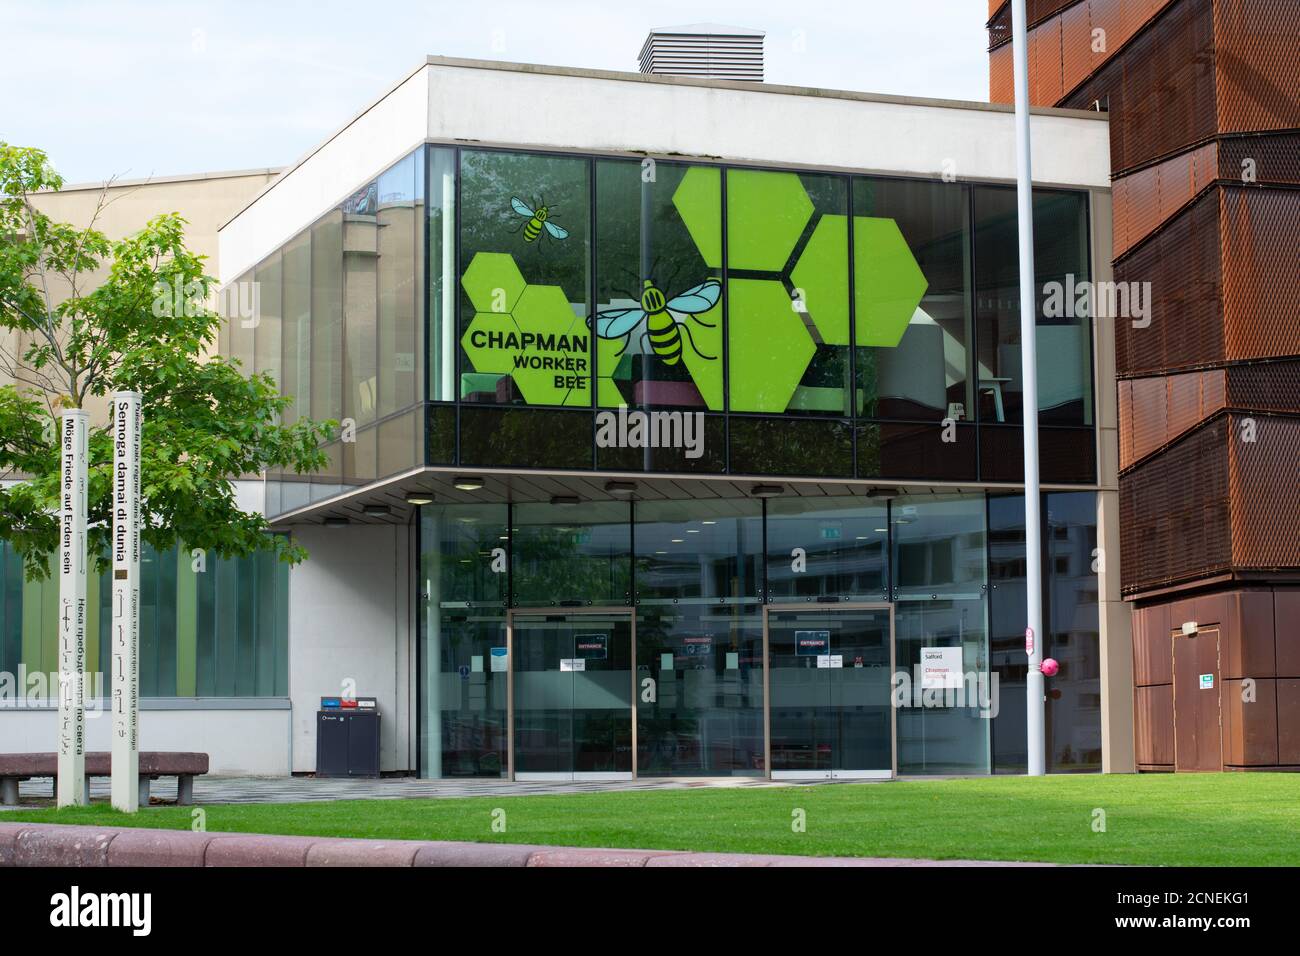 Salford University, Greater Manchester, UK. Chapman building with worker bee design. Stock Photo